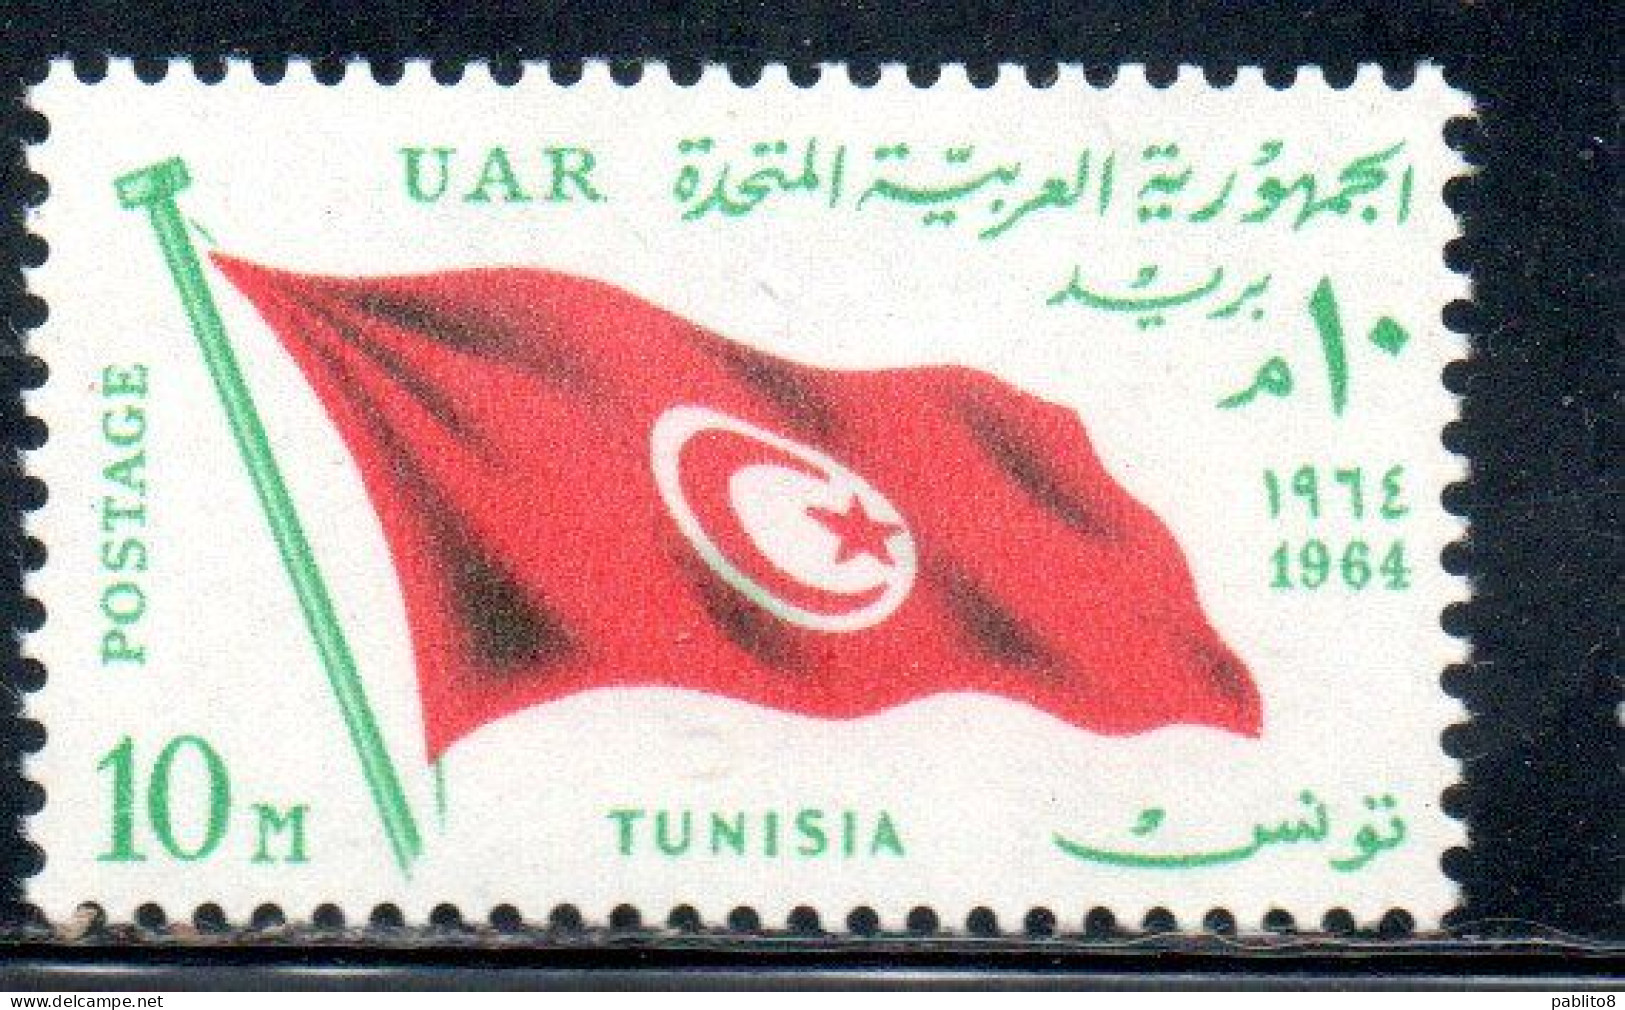 UAR EGYPT EGITTO 1964 SECOND MEETING OF HEADS STATE ARAB LEAGUE FLAG OF TUNISIA 10m MH - Unused Stamps